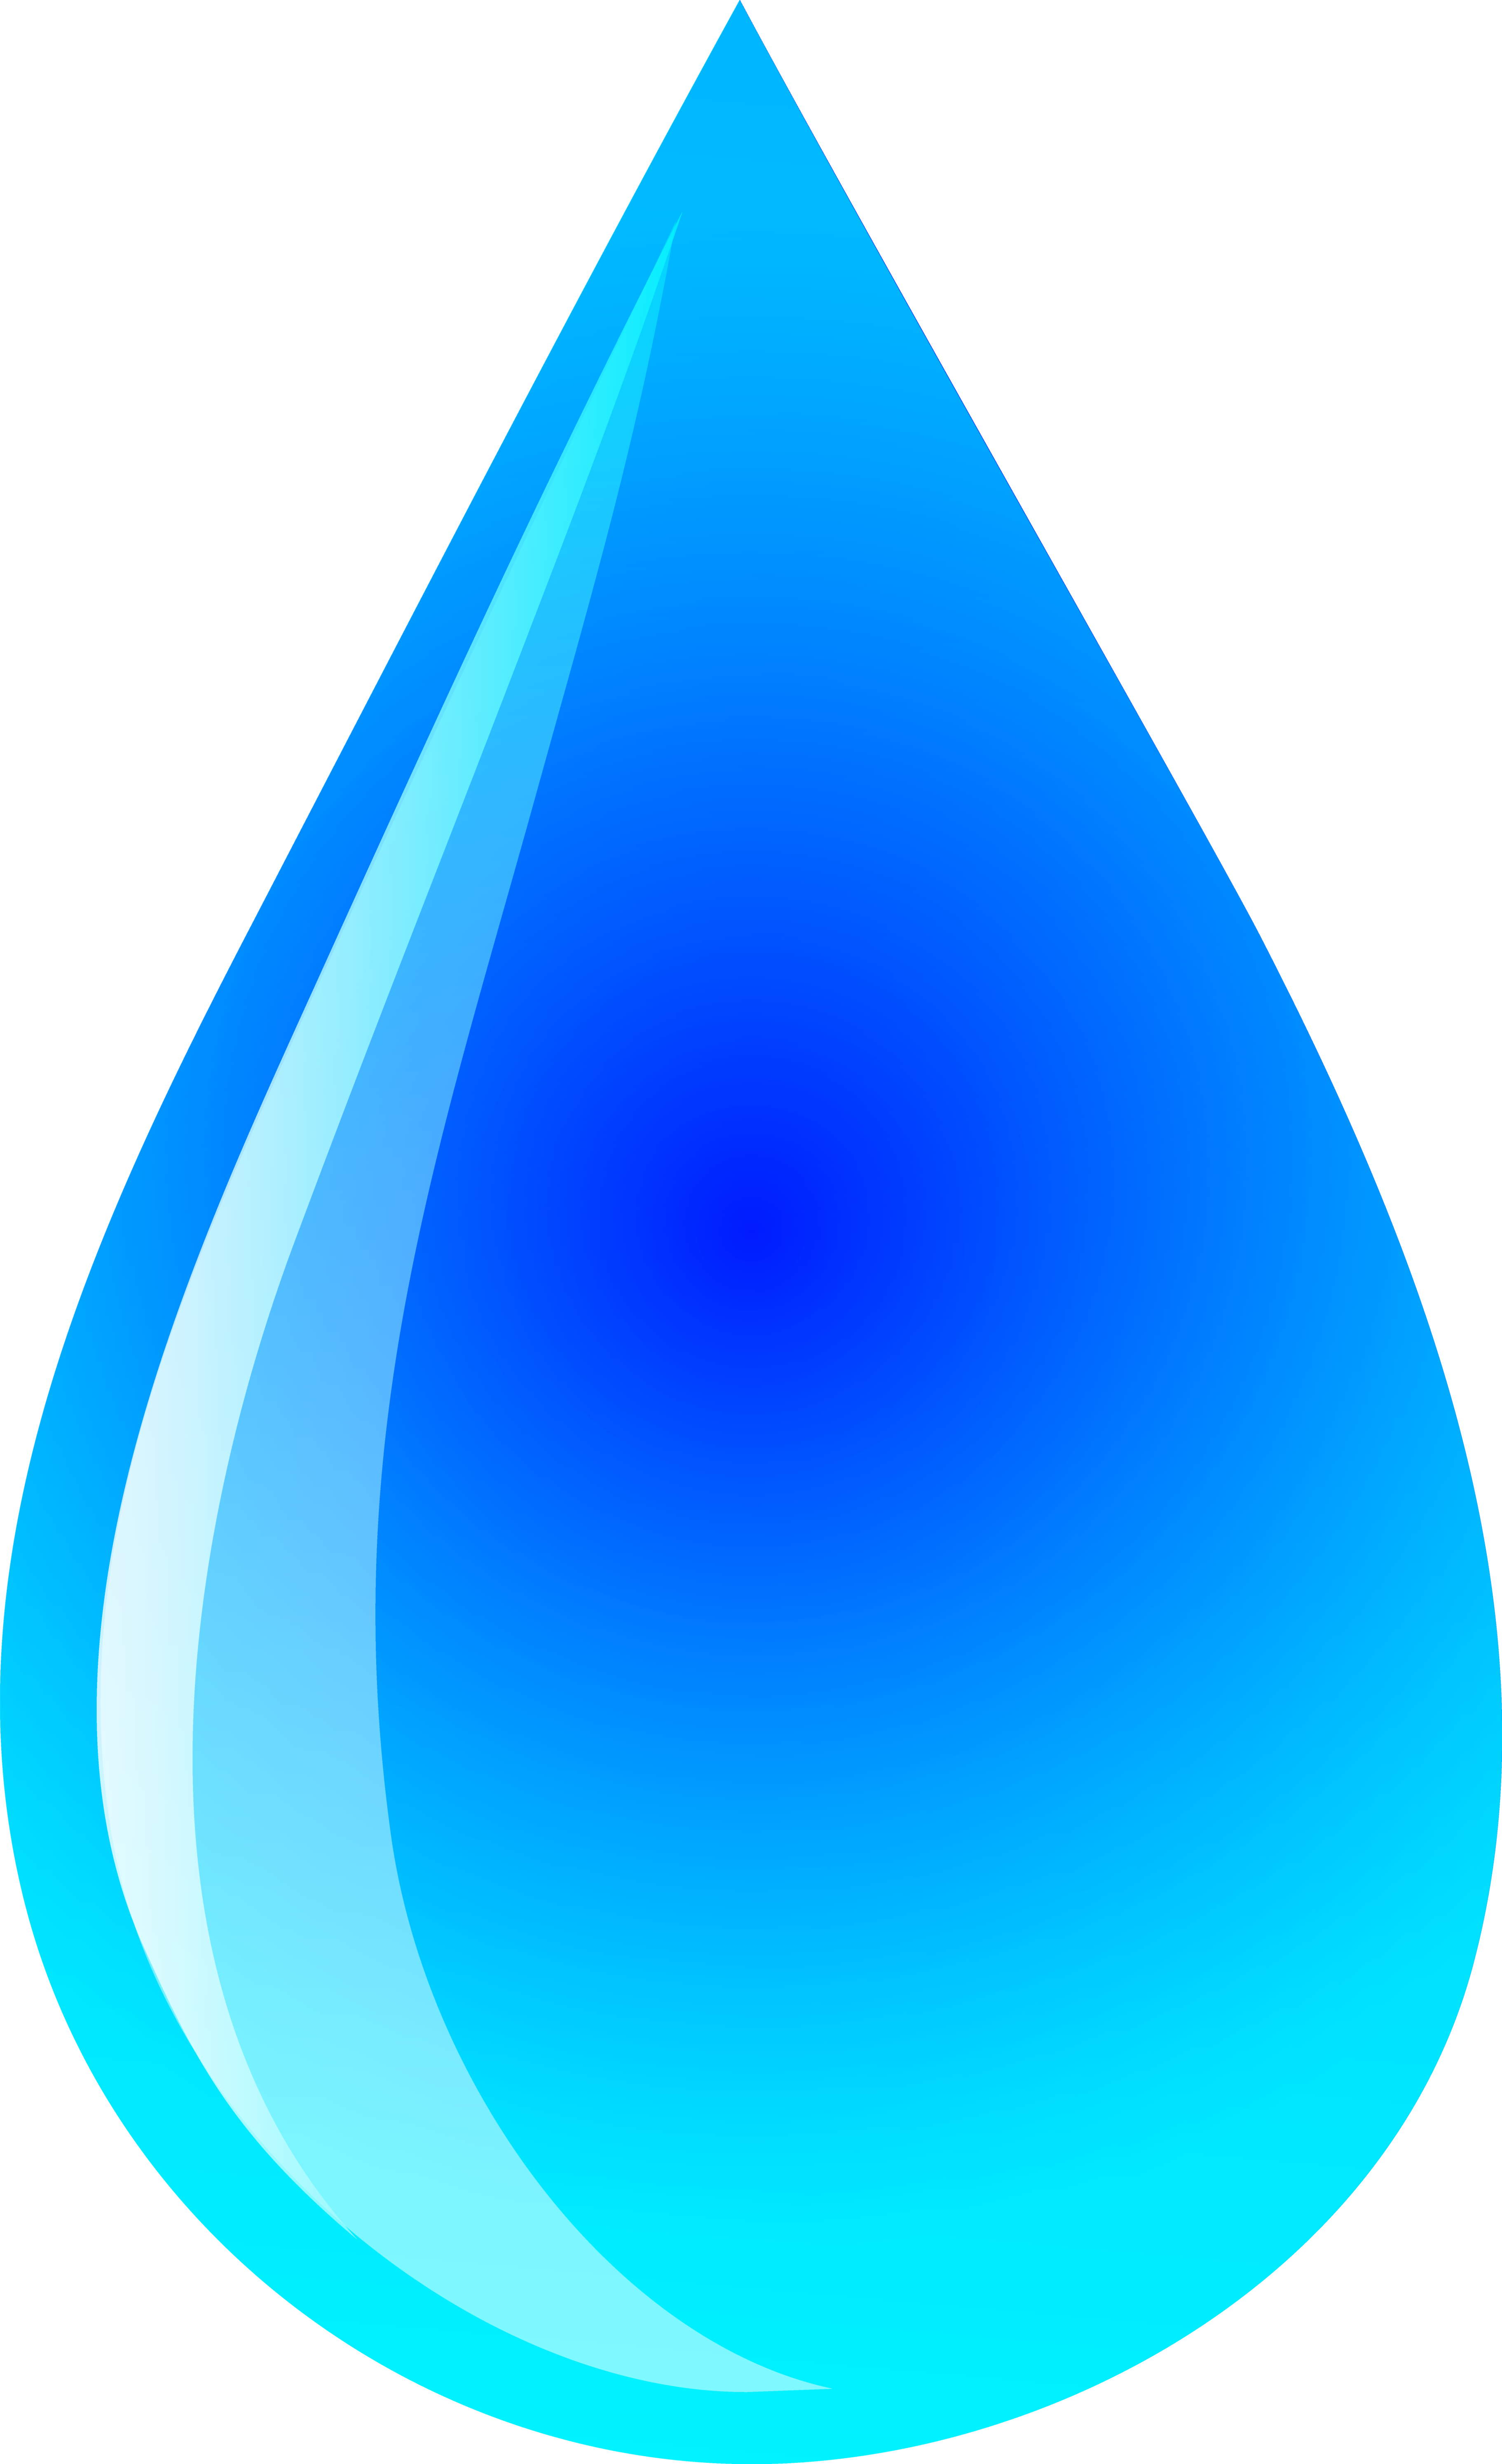 Water drop clipart icon